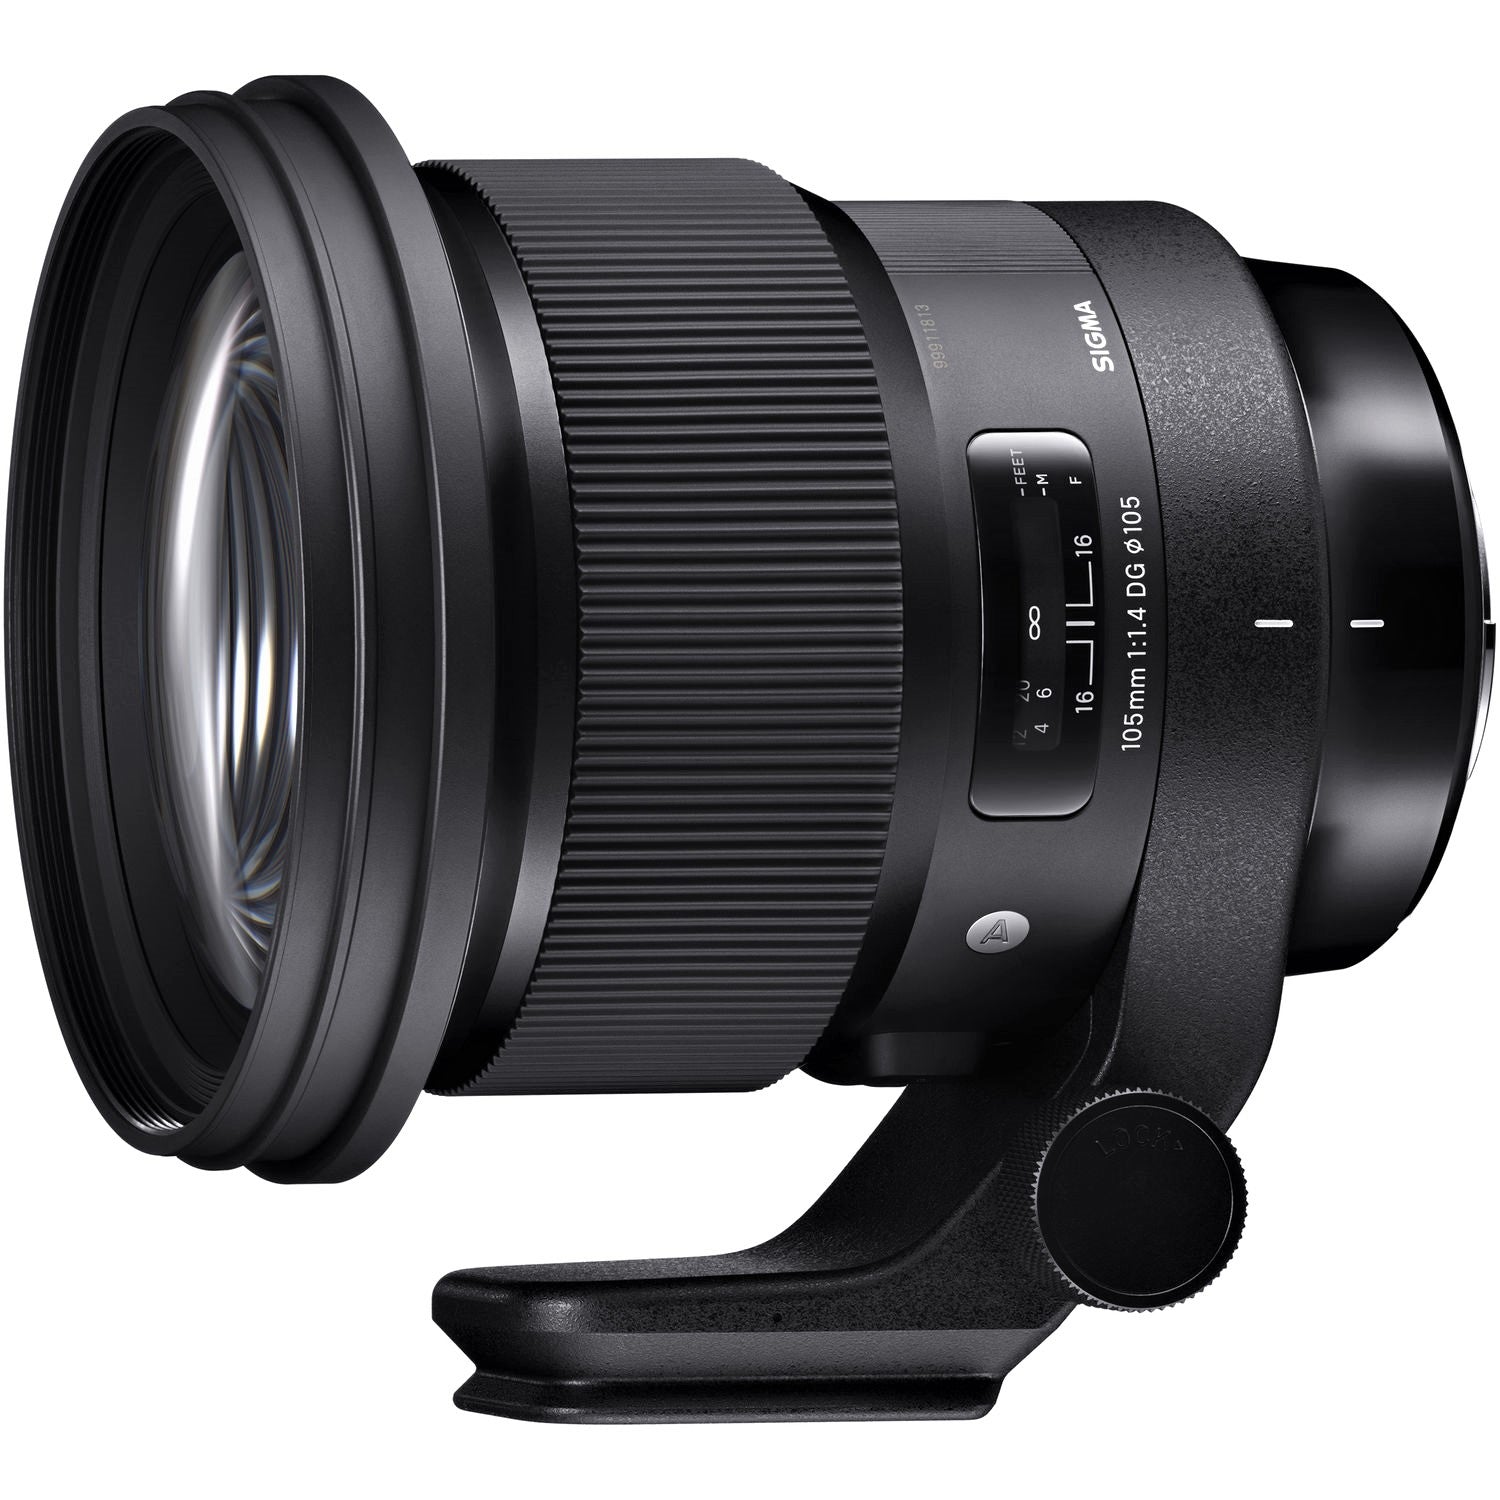 Sigma 105mm F1.4 DG HSM Art Lens for Sigma SA in a Side View